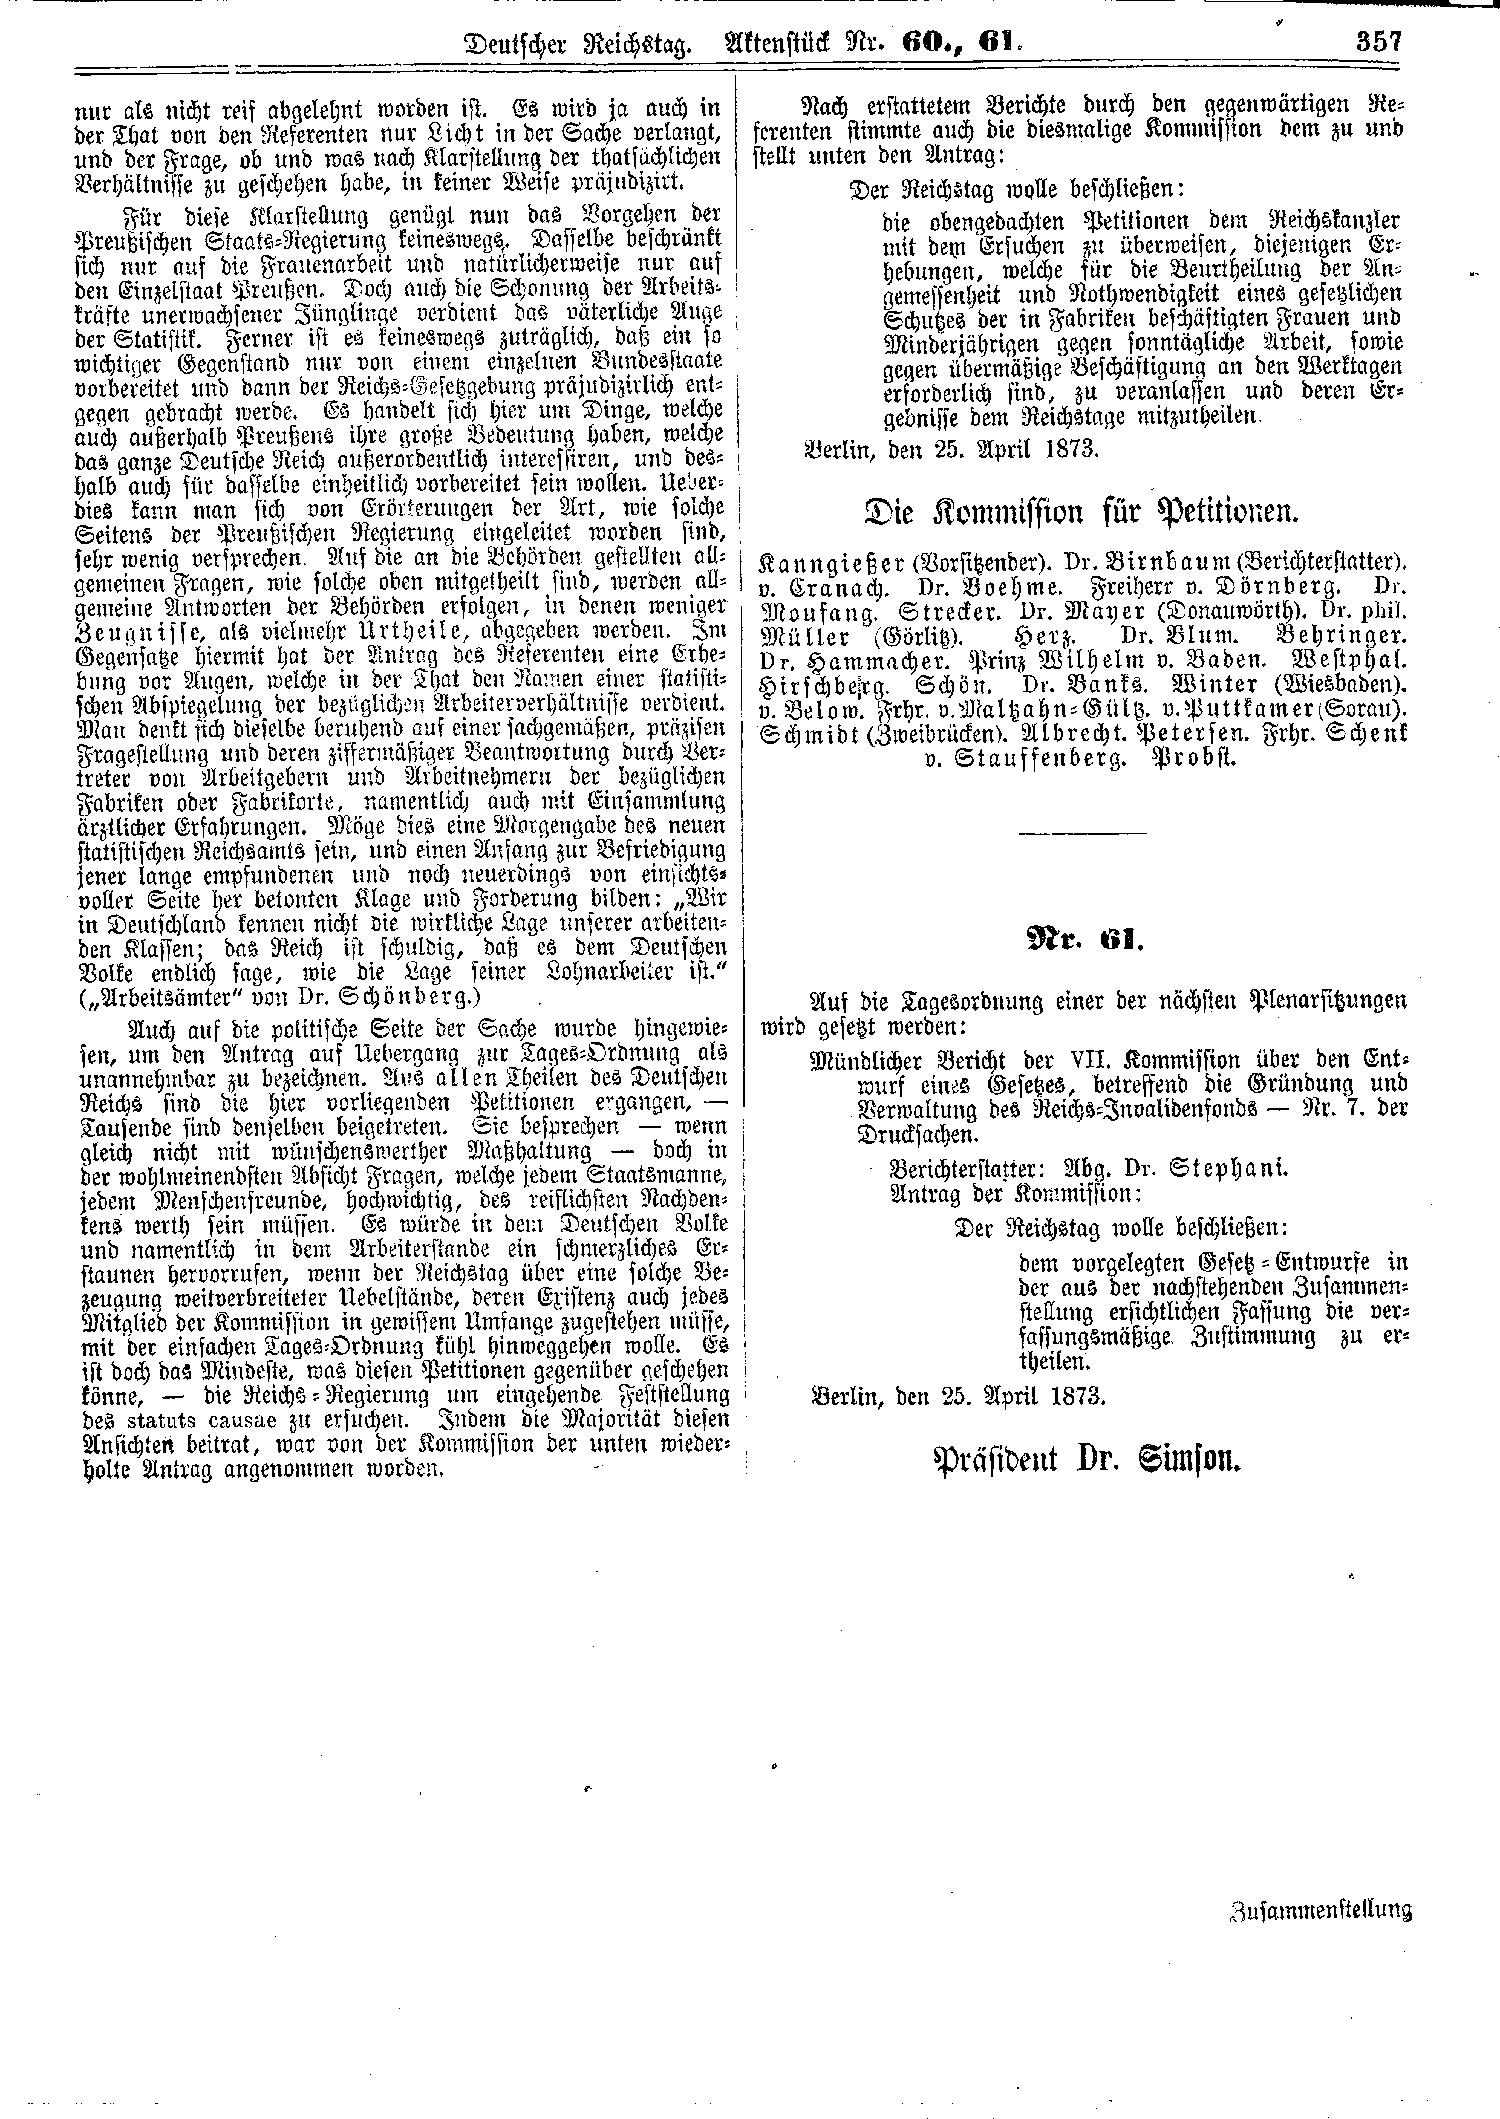 Scan of page 357